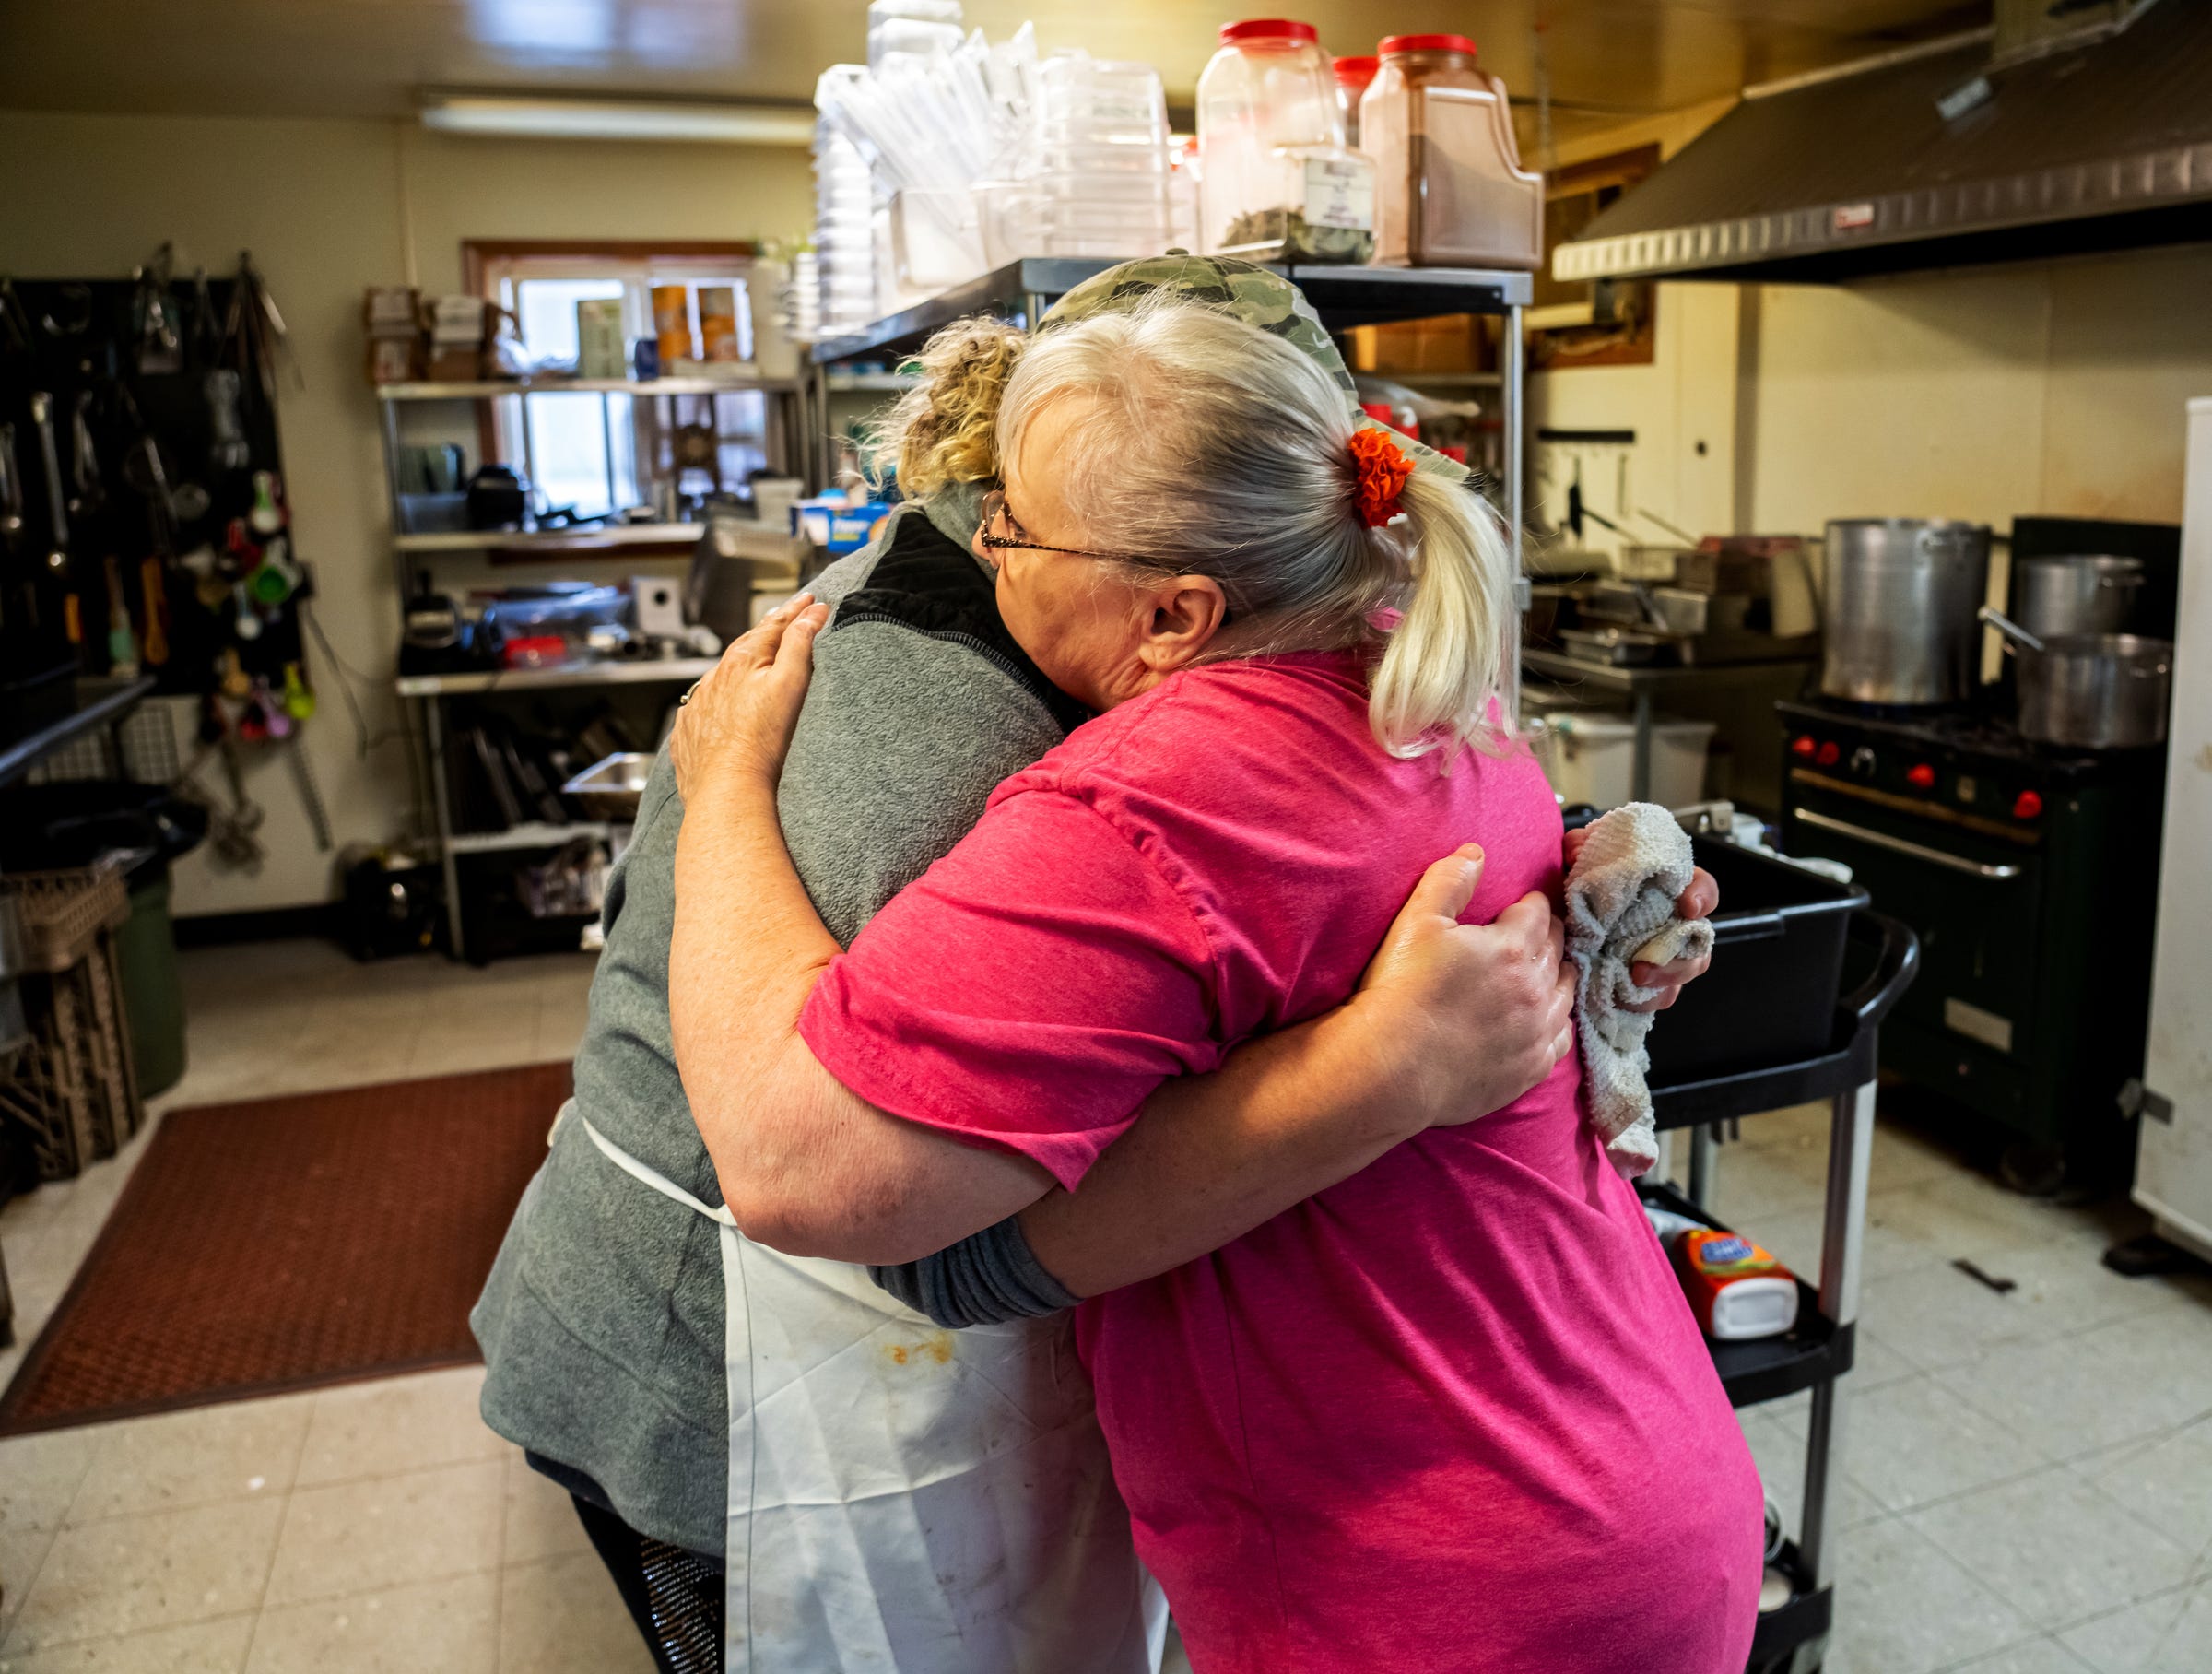 Jan Wehmeyer, right, of Gwinn, gives a hug to Shannon's Home Cooking owner Shannon Greathouse on Wednesday, Oct. 20, 2021, as Greathouse deals with a tough, long day. Wehmeyer was once a dishwasher at the restaurant.